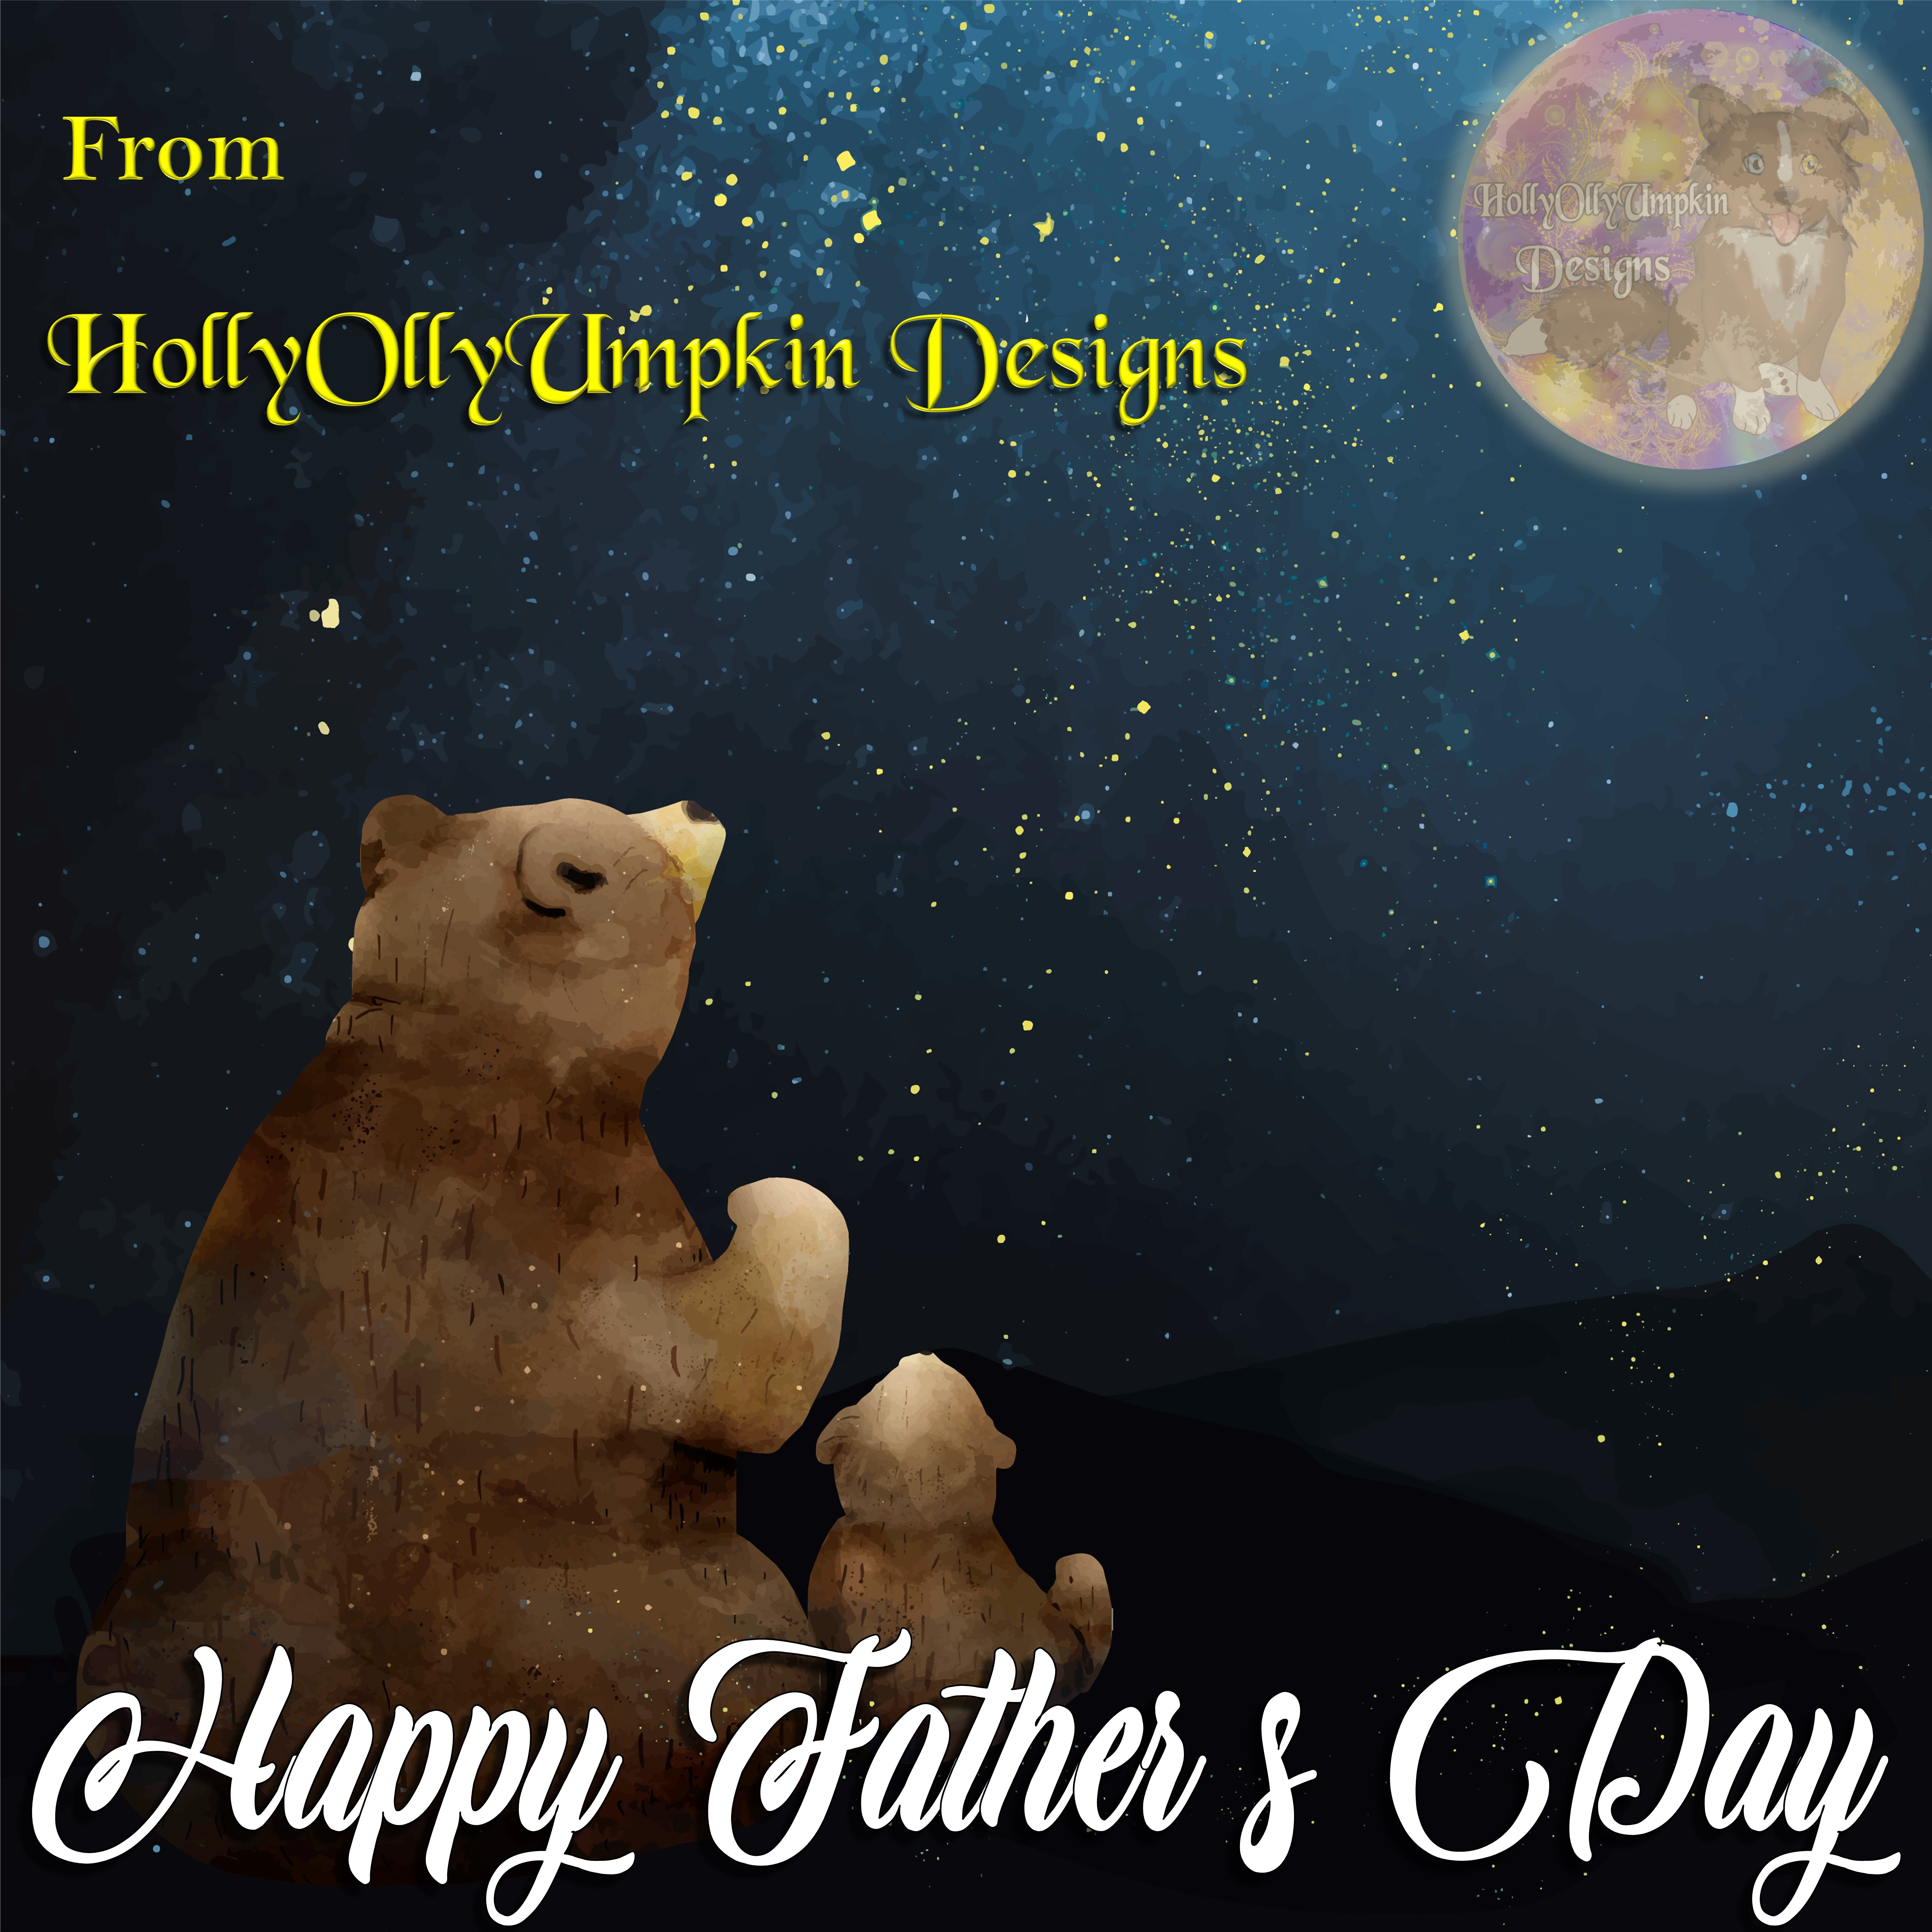 2020.06.20 - Digital Content - HollyOllyUmpkin - Father's Day